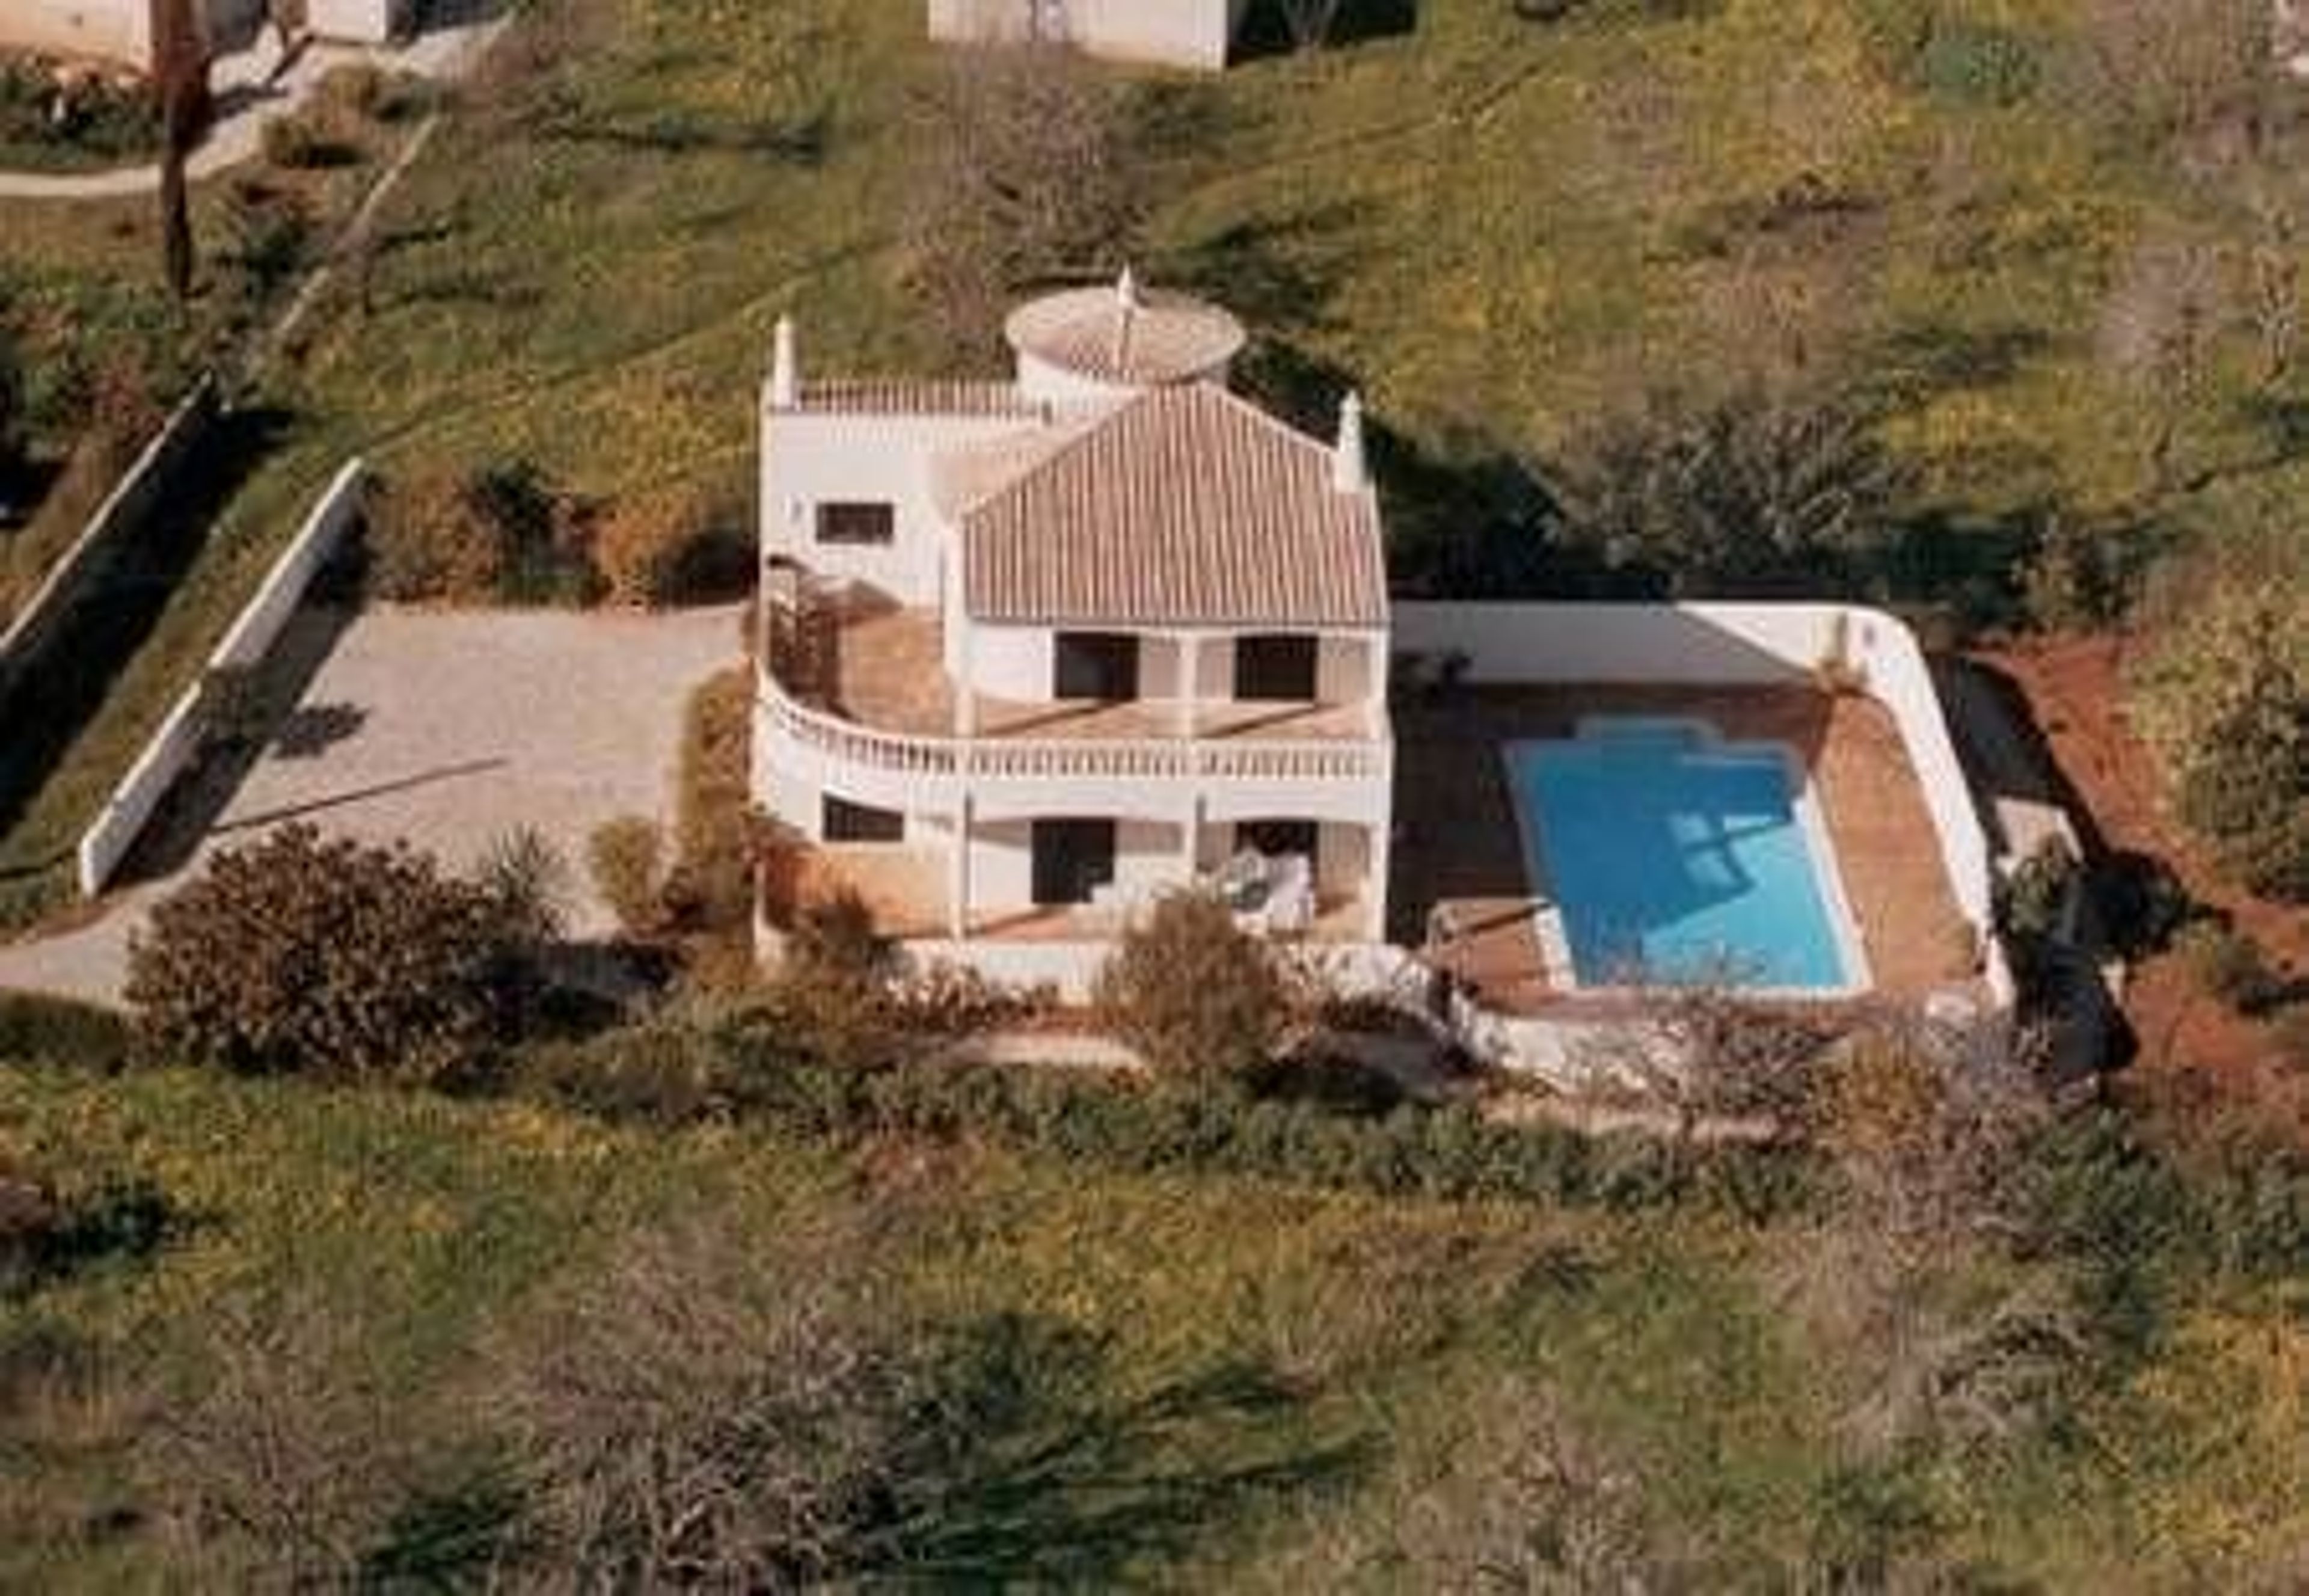 Casa Alimas from the air - taken in winter!